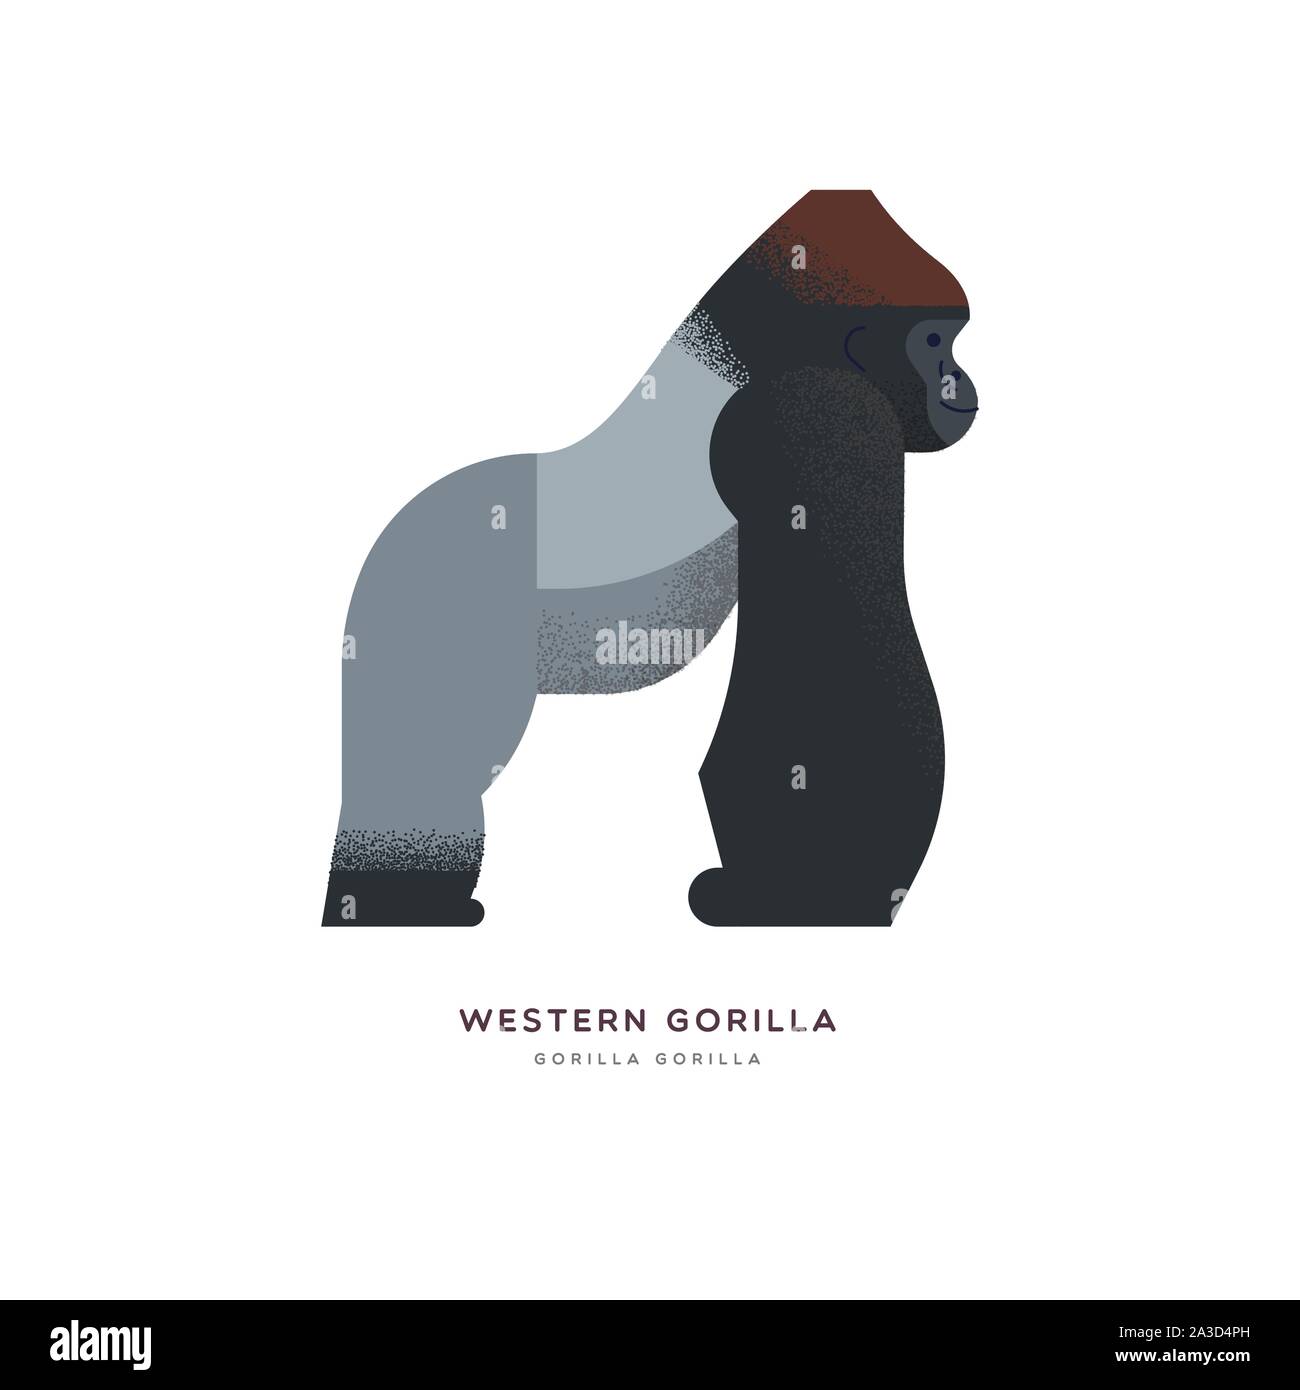 Western gorilla illustration on isolated white background, african safari animal concept. Educational wildlife design with fauna species name label. Stock Vector